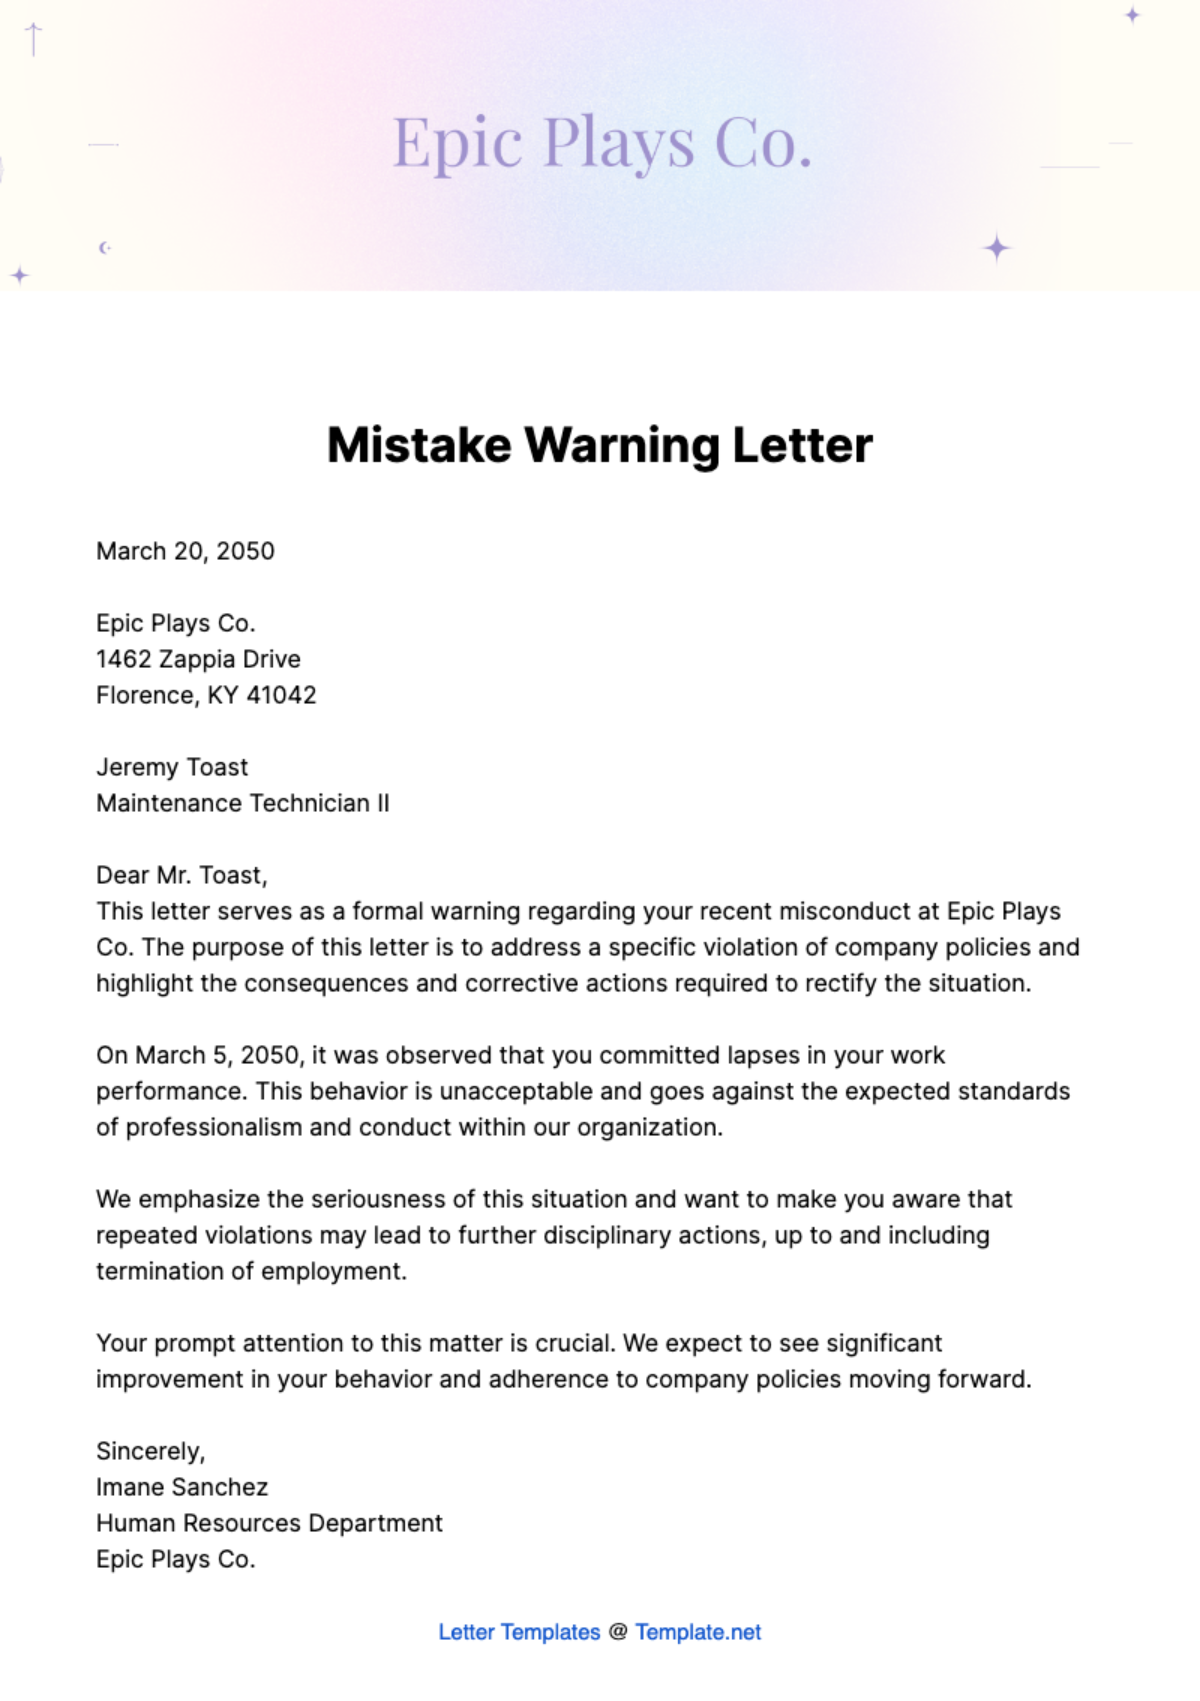 Mistake Warning Letter Template